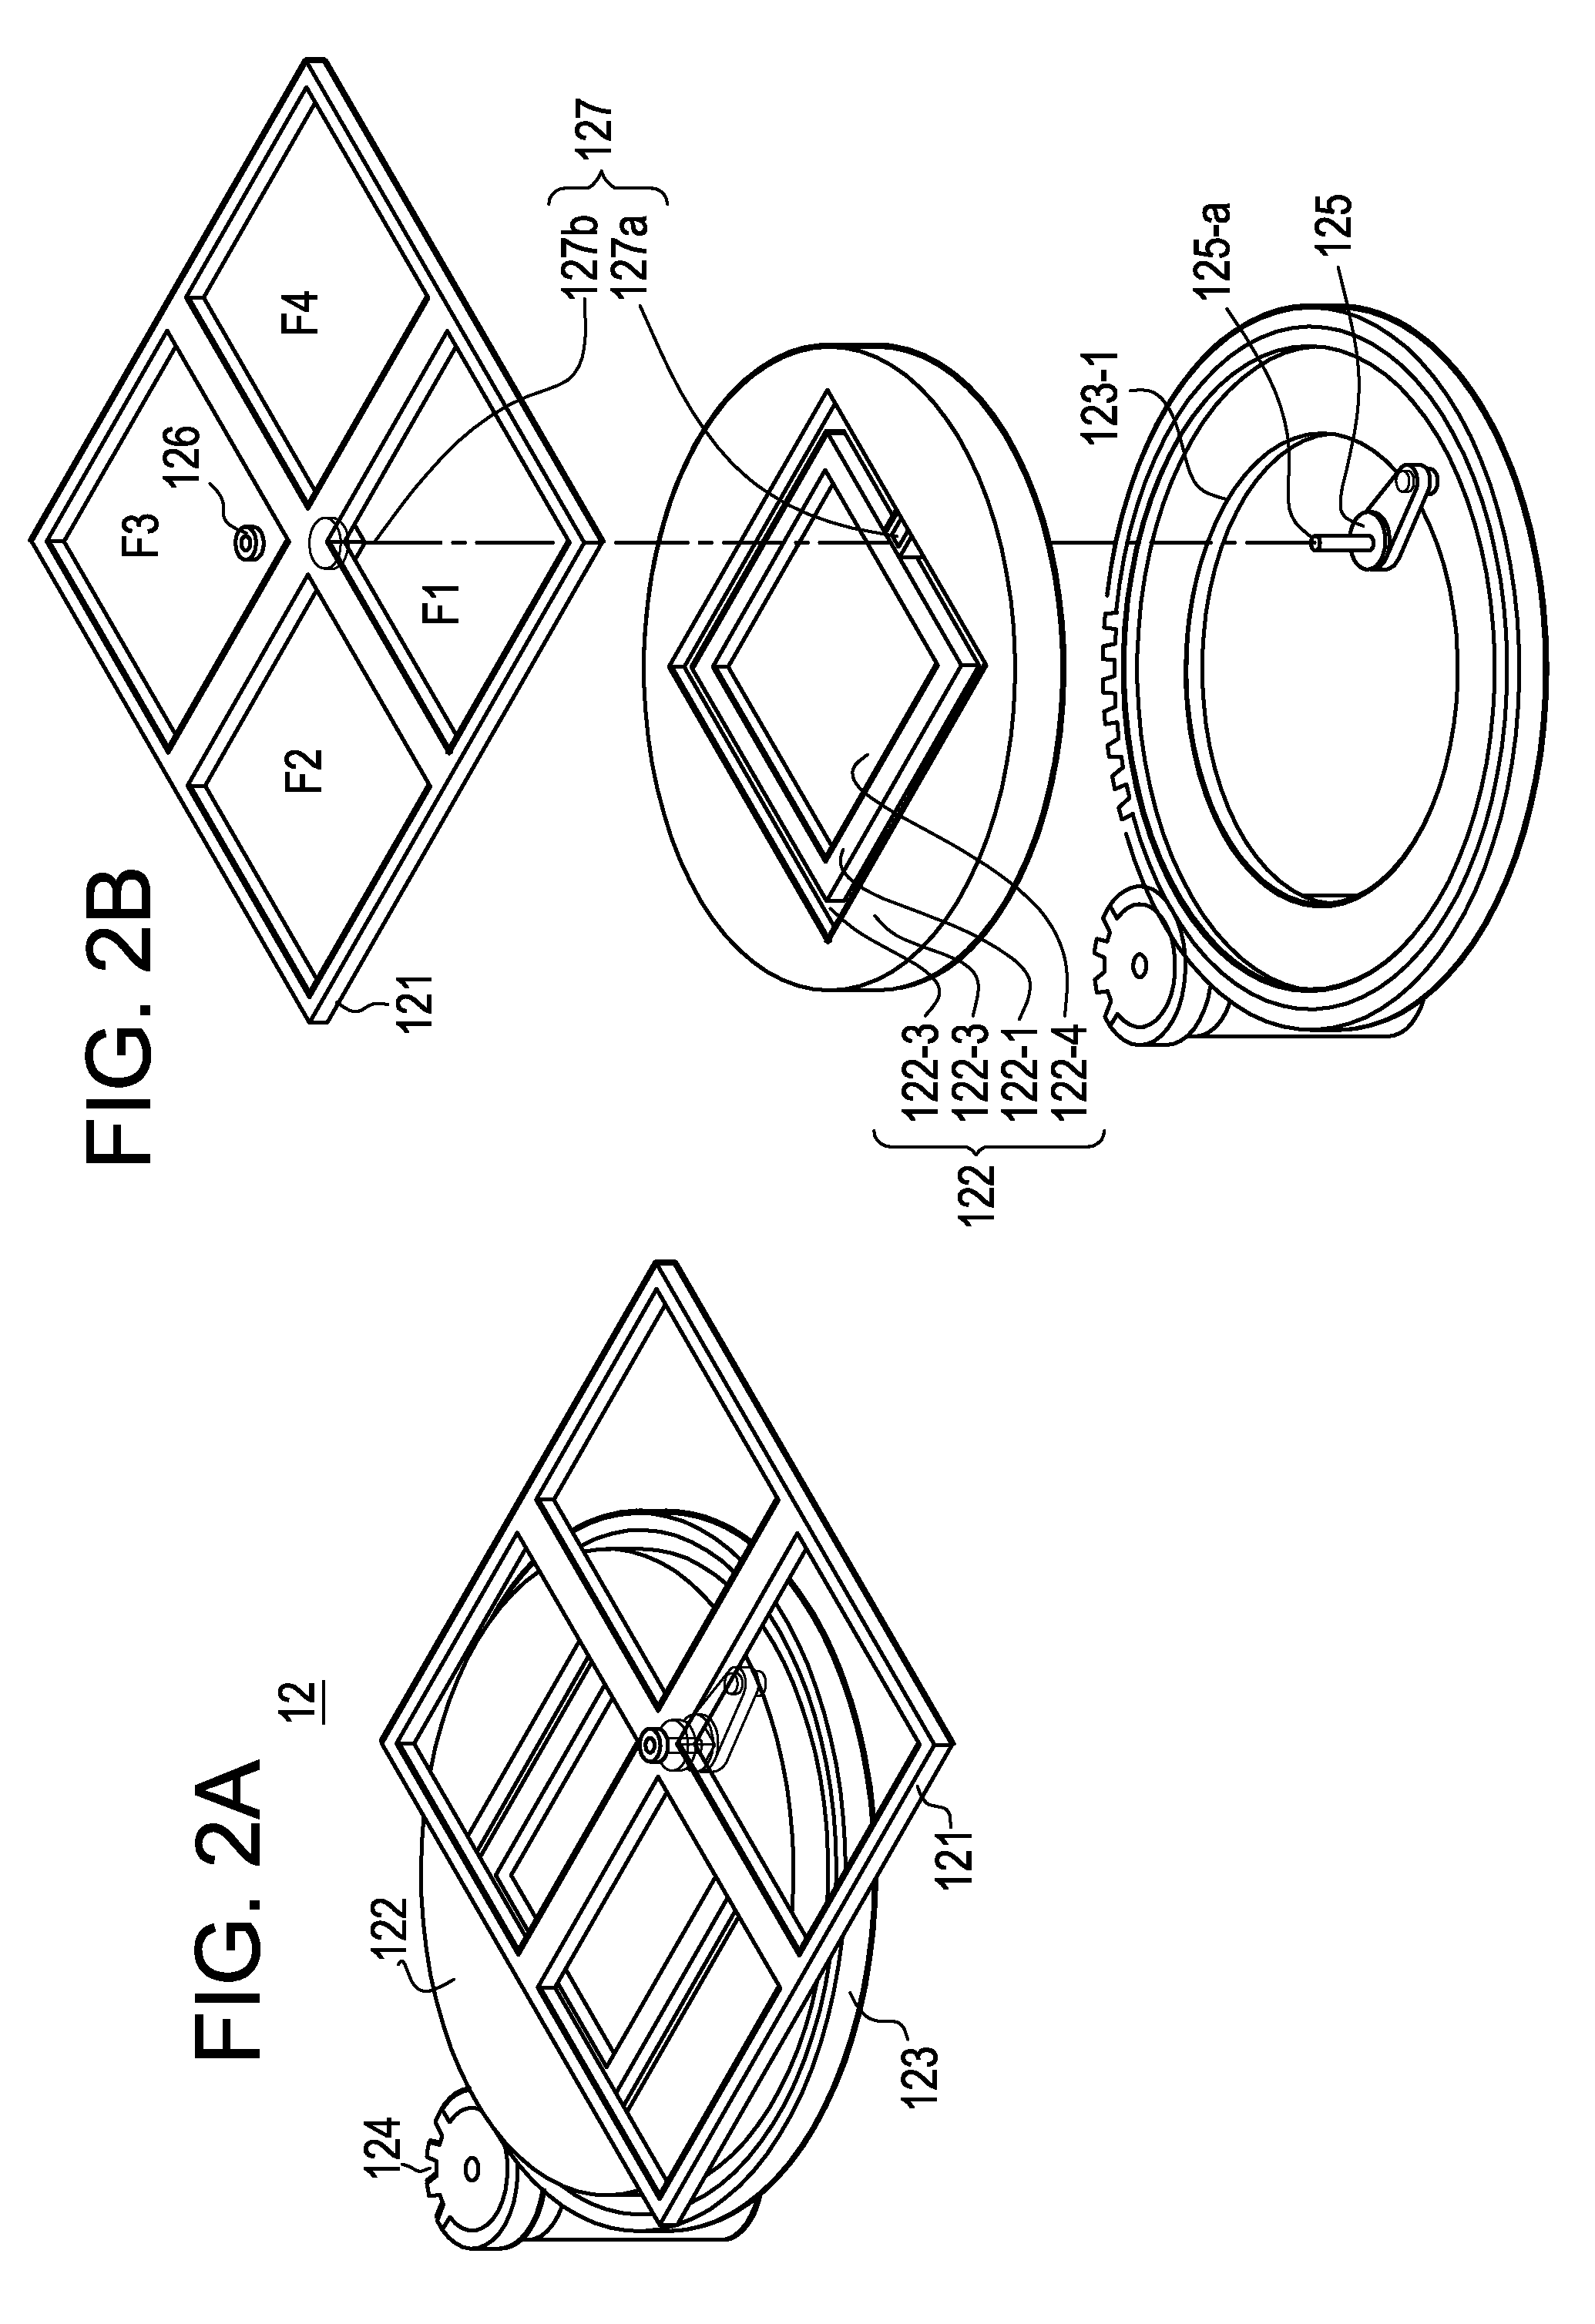 Filter unit, X-ray tube unit, and X-ray imaging system